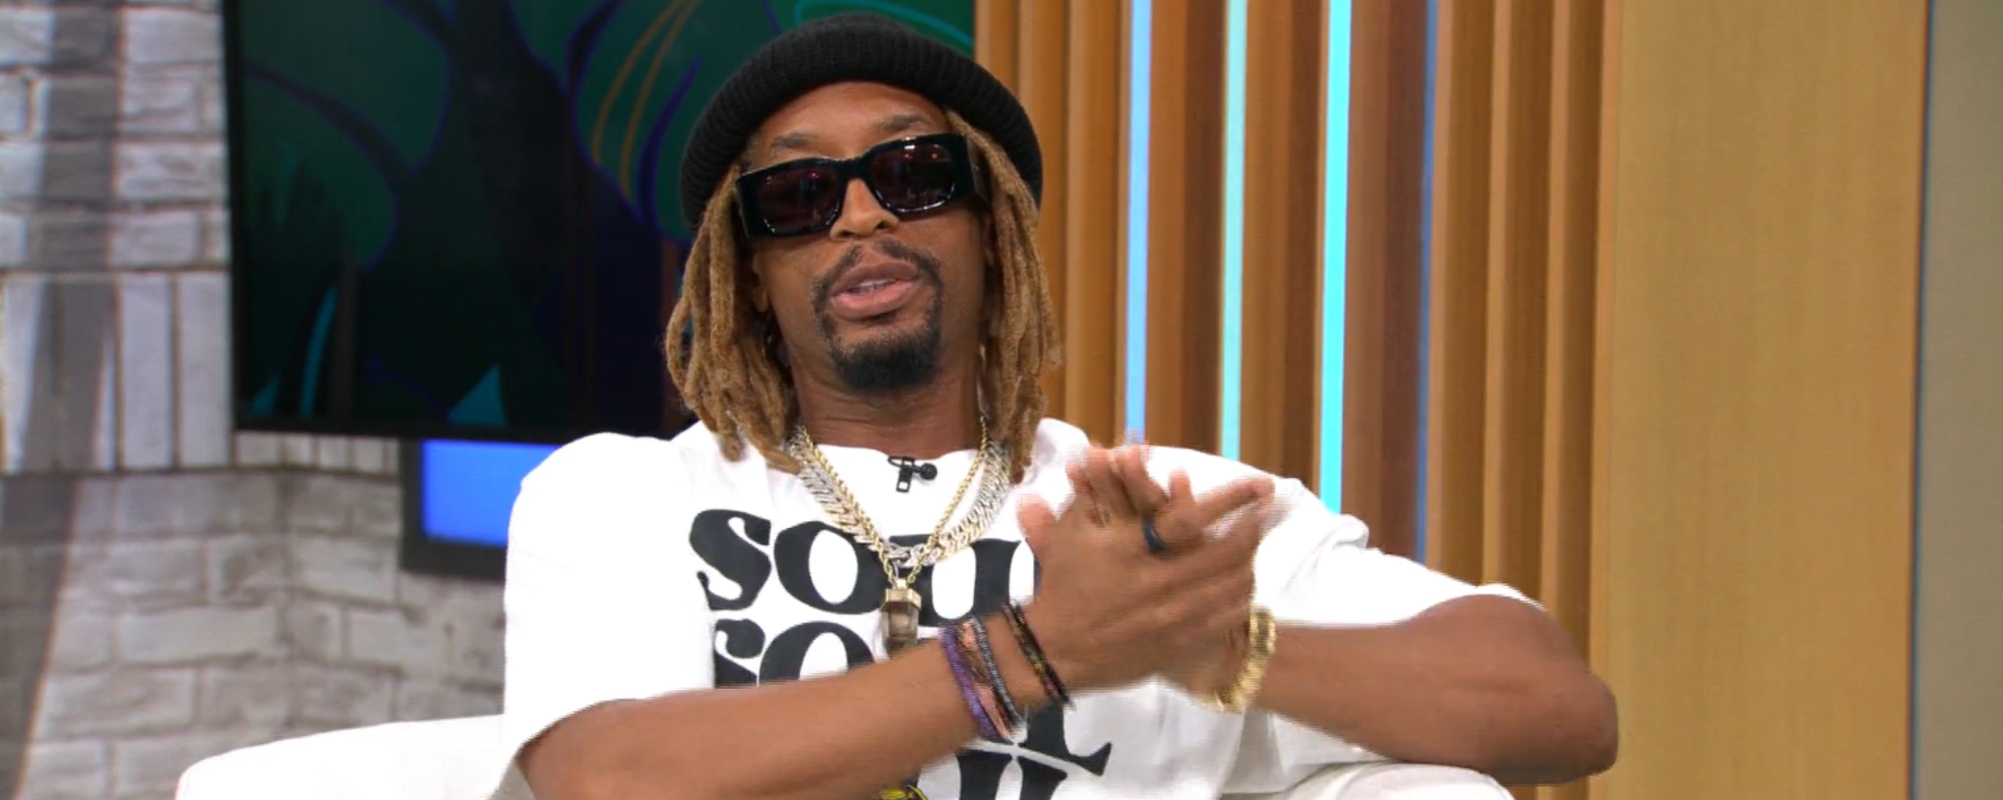 Lil Jon Opens Up About His Journey to Clarity with New Album ‘Total Meditation’